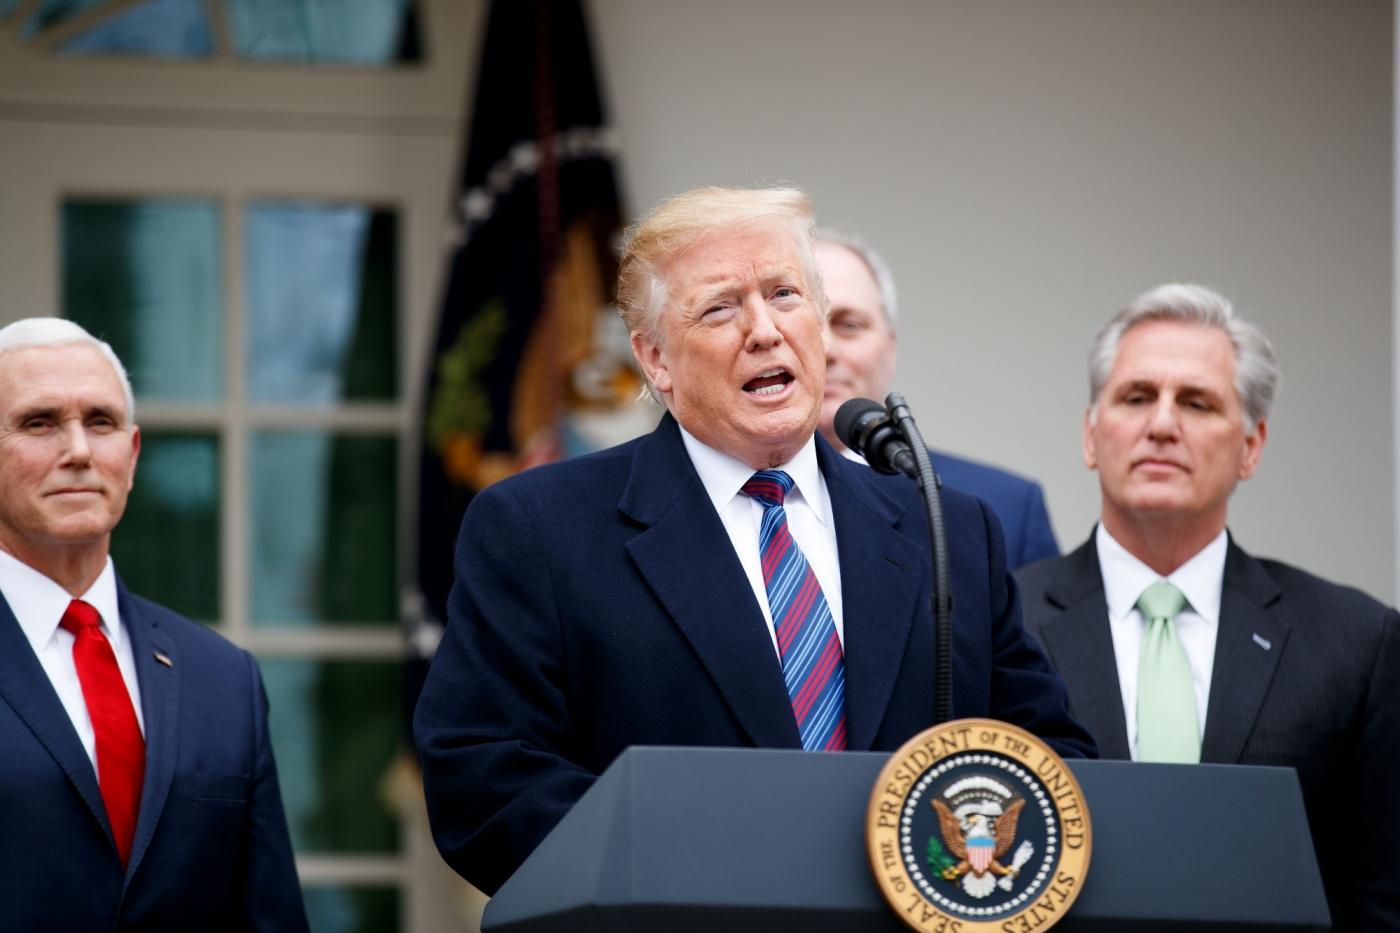 WASHINGTON, Jan. 4, 2019 (Xinhua) -- U.S. President Donald Trump (C) speaks during a press conference at the White House Rose Garden in Washington D.C., the United States, on Jan. 4, 2019. Trump said Friday that he's prepared for a partial government shutdown to last for months or years, after his meeting with Congressional leaders yielded no deal on funding for a U.S.-Mexico border wall. (Xinhua/Ting Shen/IANS) by .